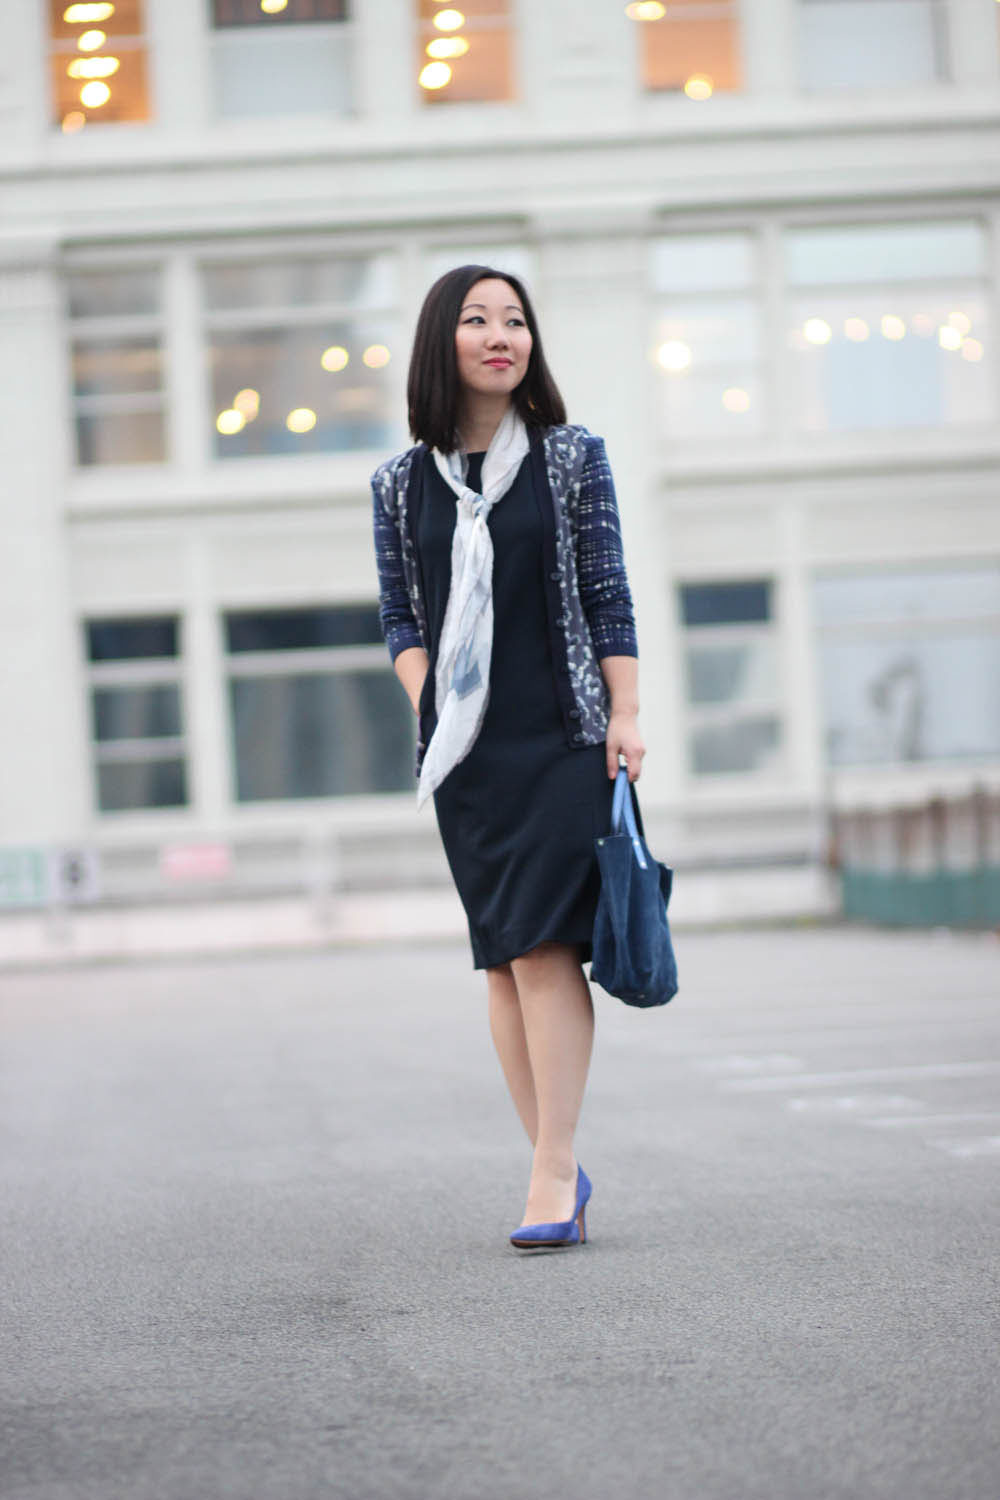 MM LAFLEUR Navy Sarah 2.0 Dress | J. CREW EVERLY suede pumps | TIFFANY & CO Reversible Tote | CHANEL scarf | TORY BURCH cardigan | Vancouver Style Blog | WORKWEAR